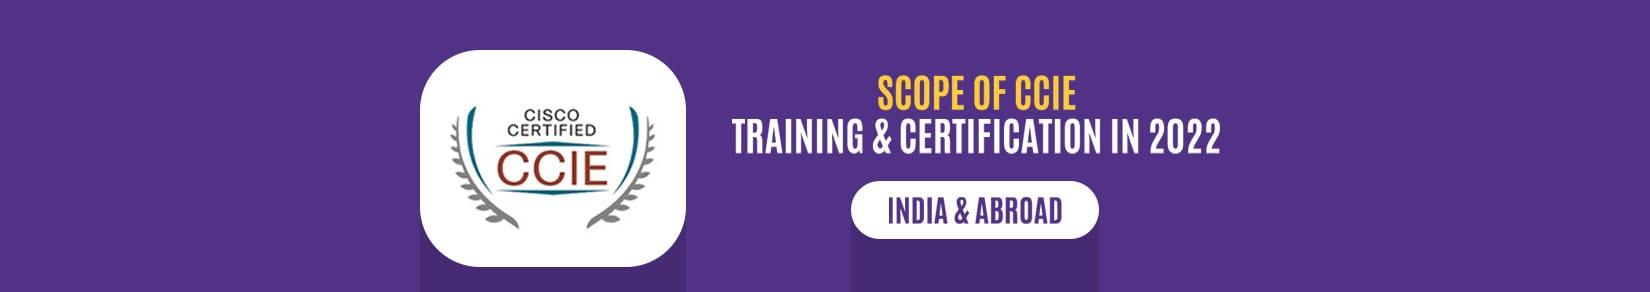 Scope of CCIE Training & Certification - 2022: India and Abroad